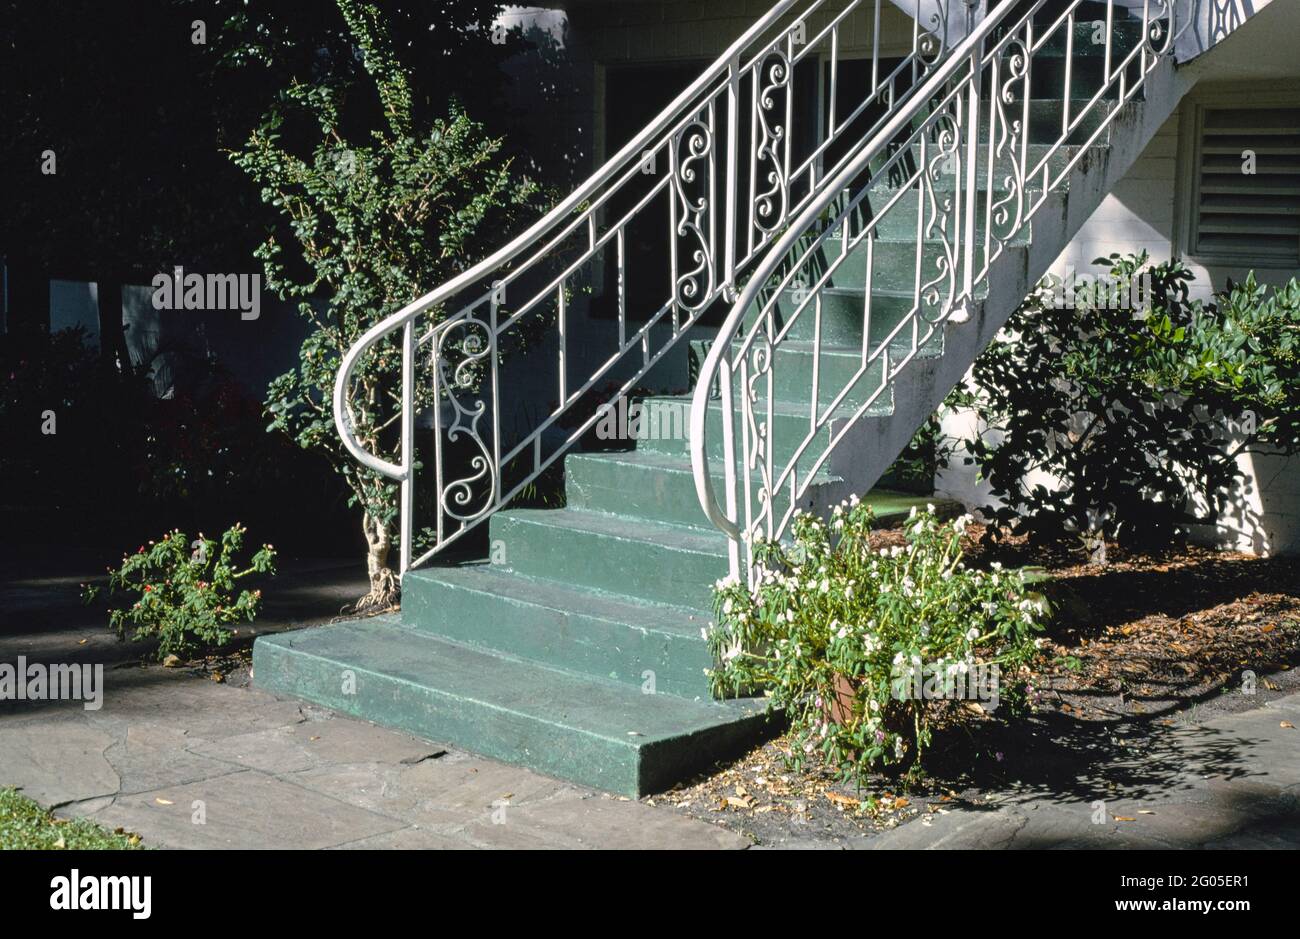 1990s United States -  Queens Court (1948), stair, Kings Way, St Simons Island, Georgia 1990 Stock Photo